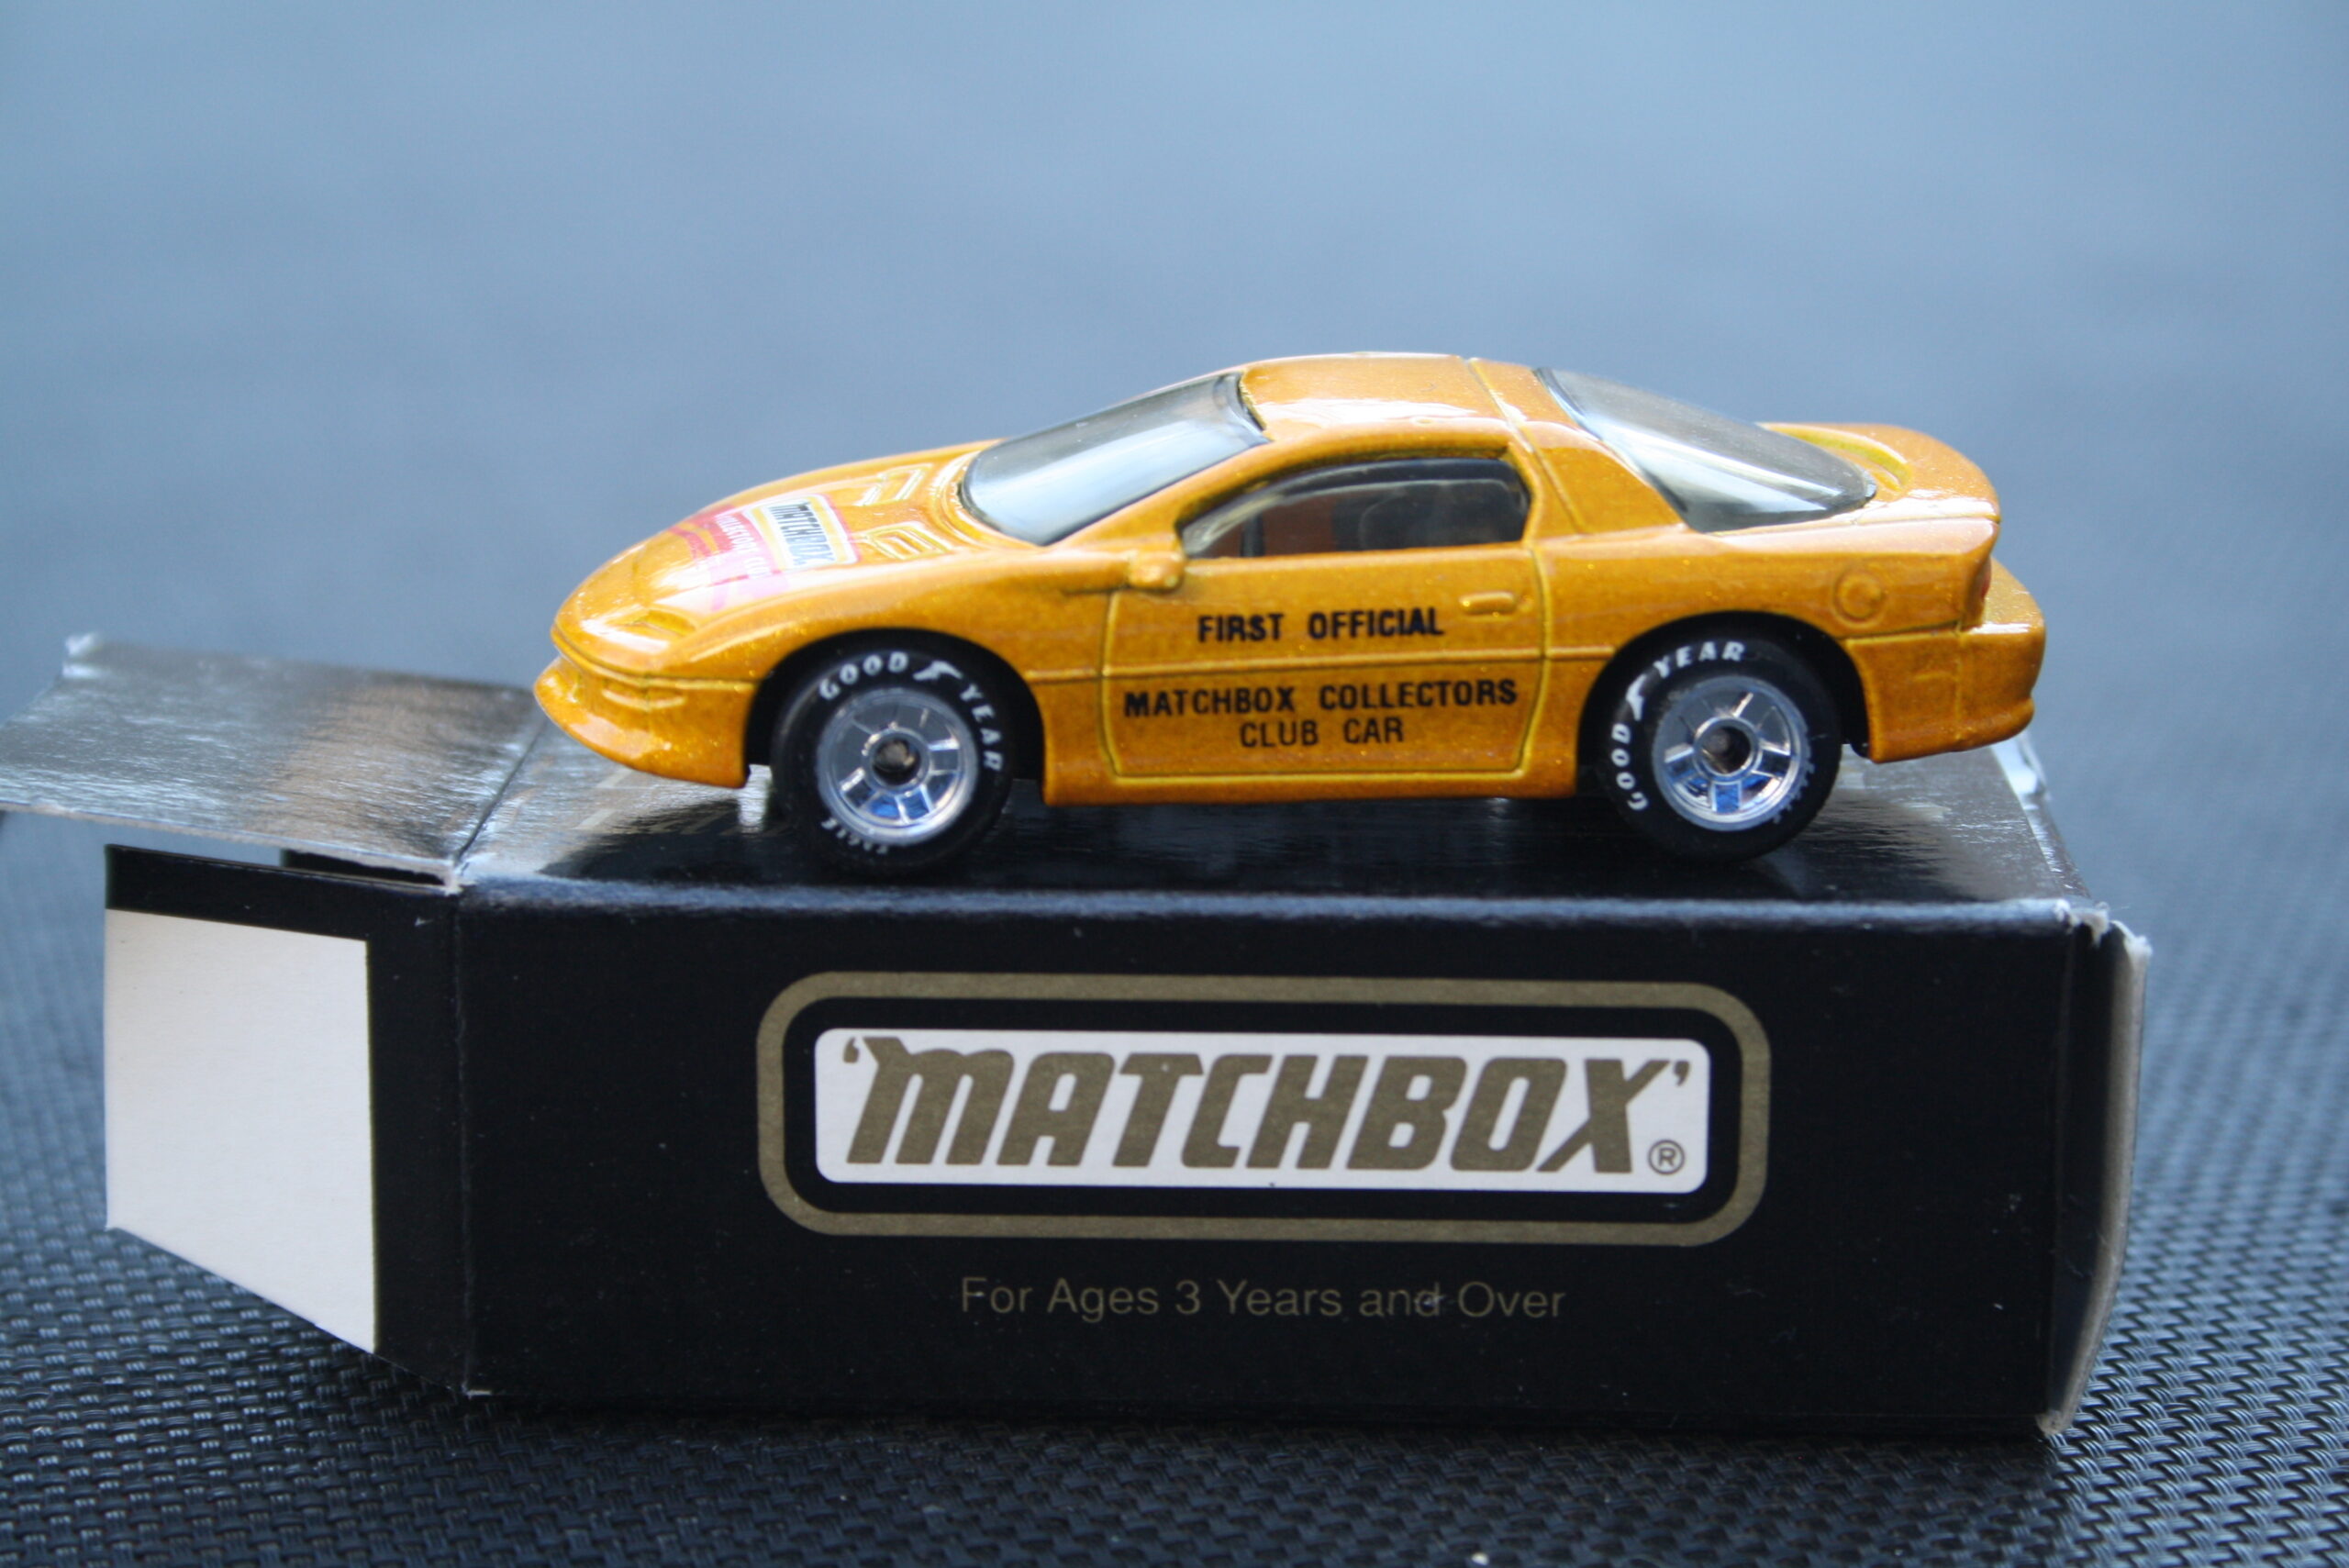 Matchbox Chevrolet Camaro - First official national Collectors Club Car 1:64